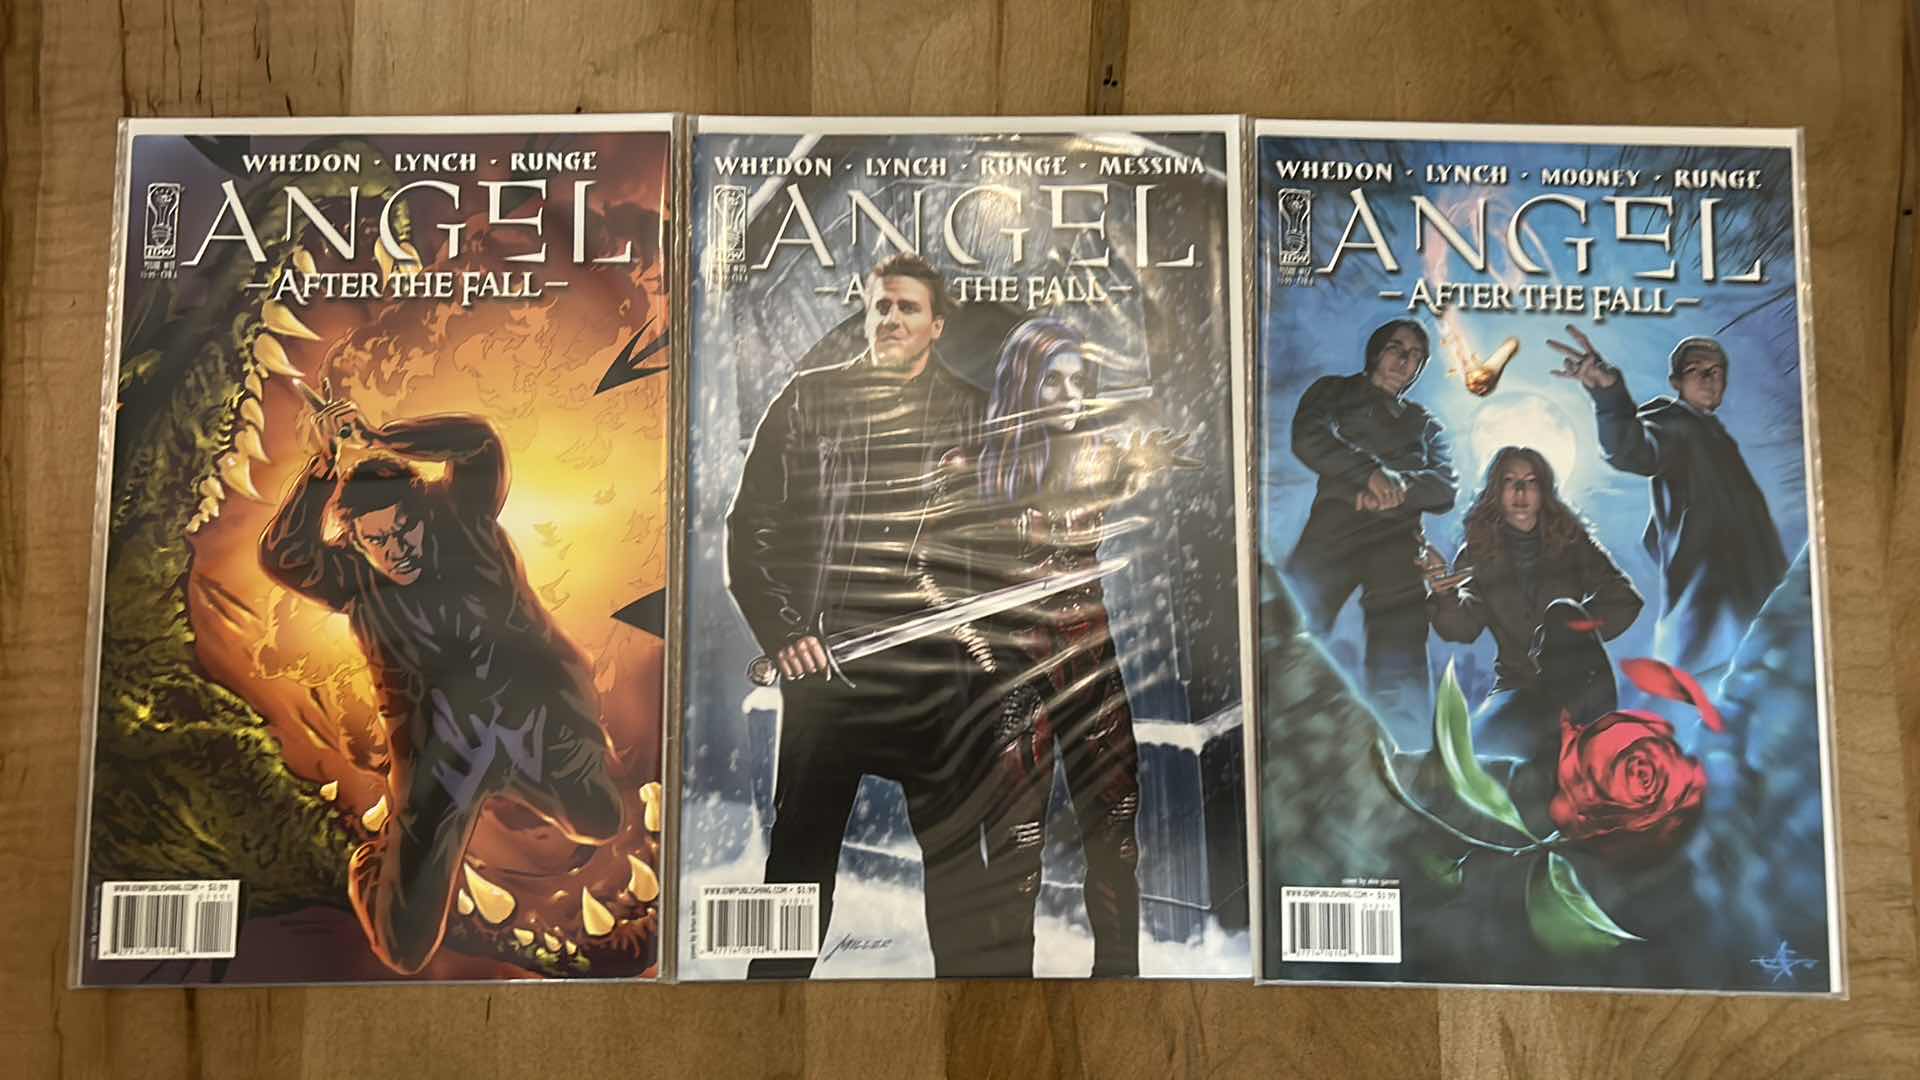 Photo 5 of 9 - ANGEL AFTER THE FALL COMIC BOOKS